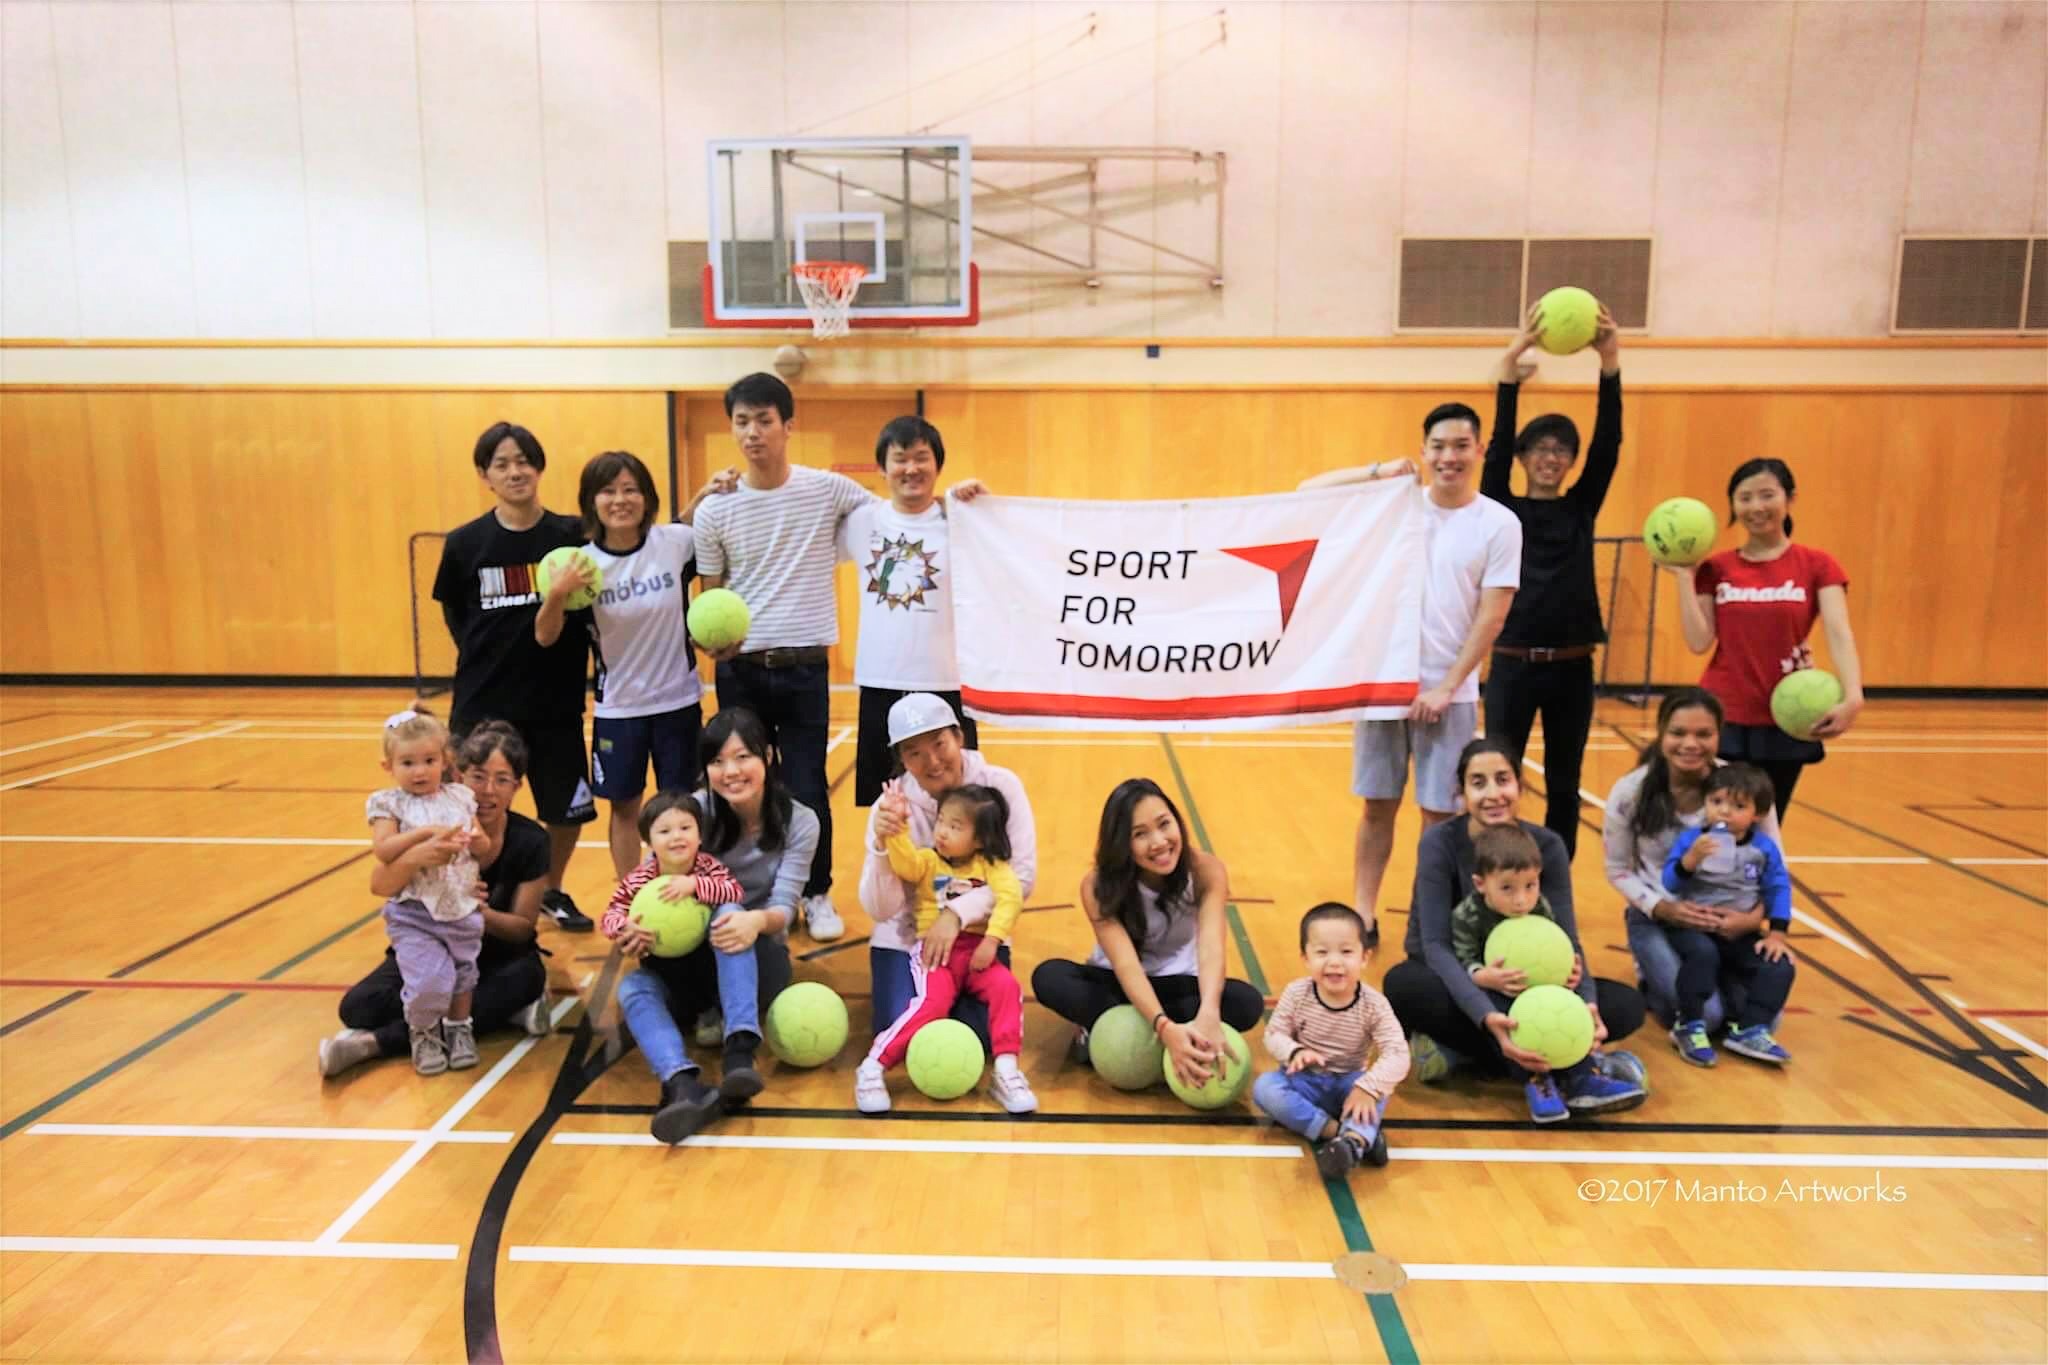 Interacting with Canadian Children through Football1